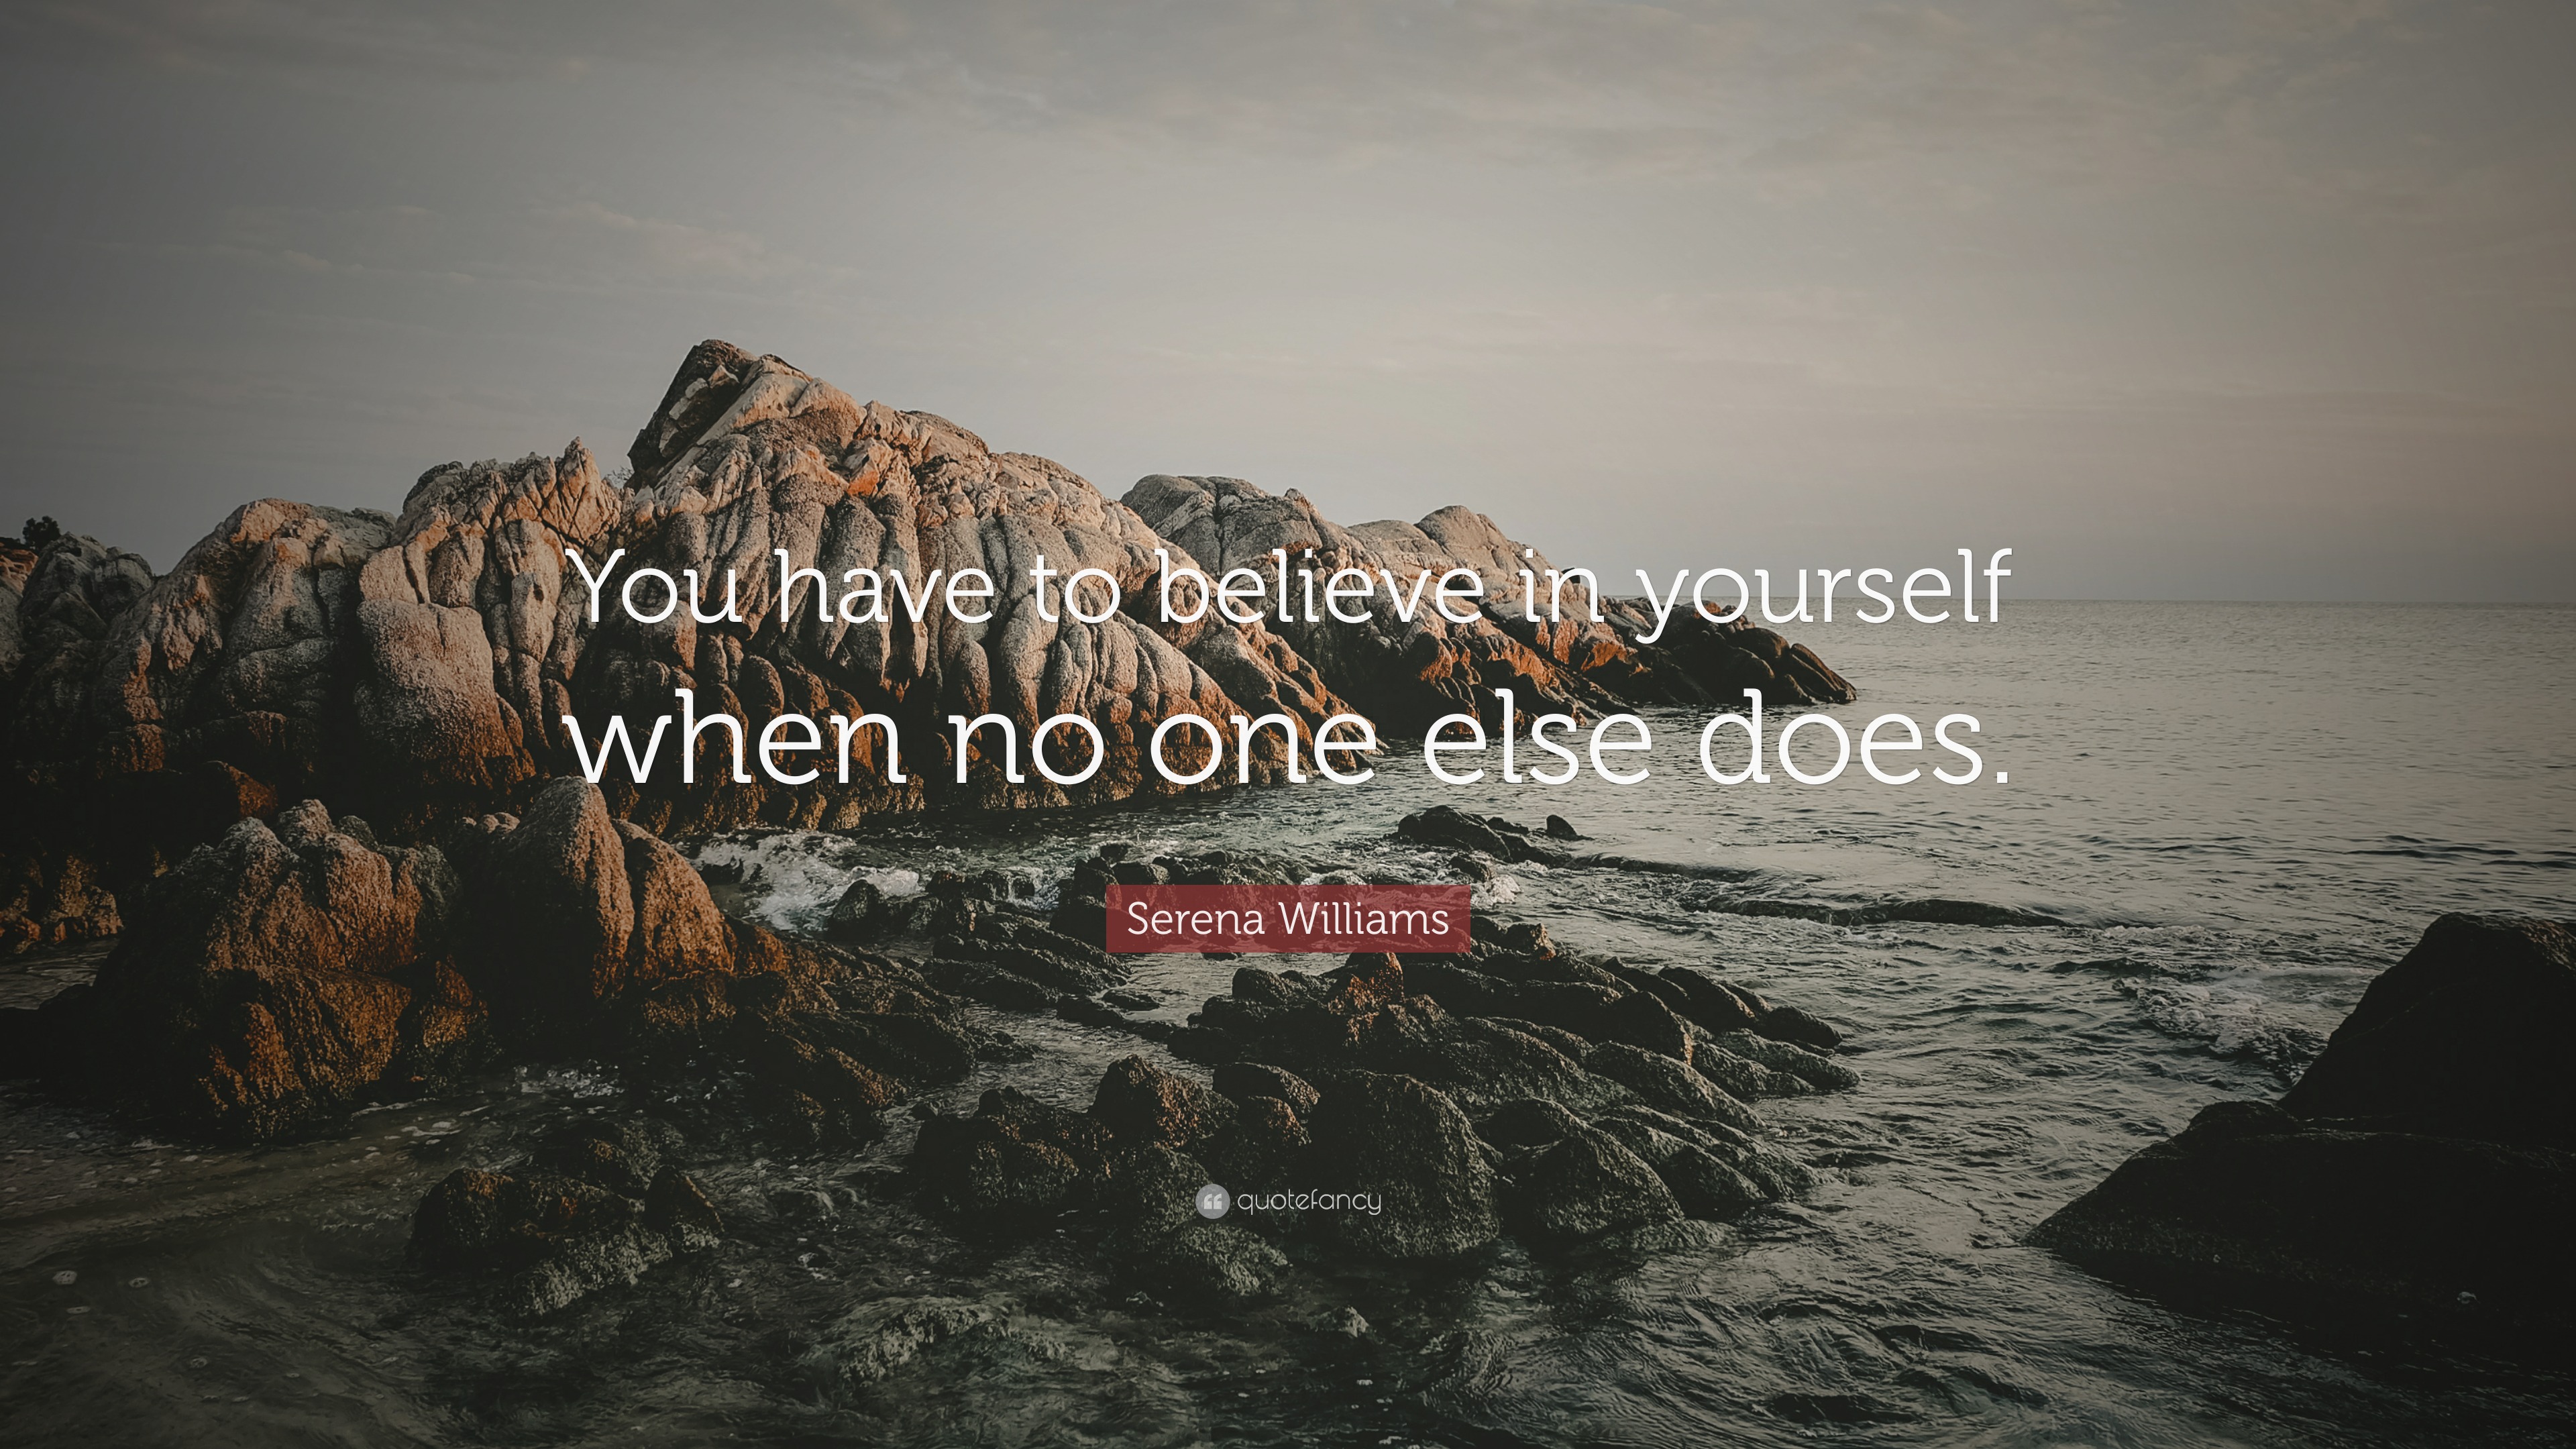 Serena Williams Quote: “You have to believe in yourself when no one ...